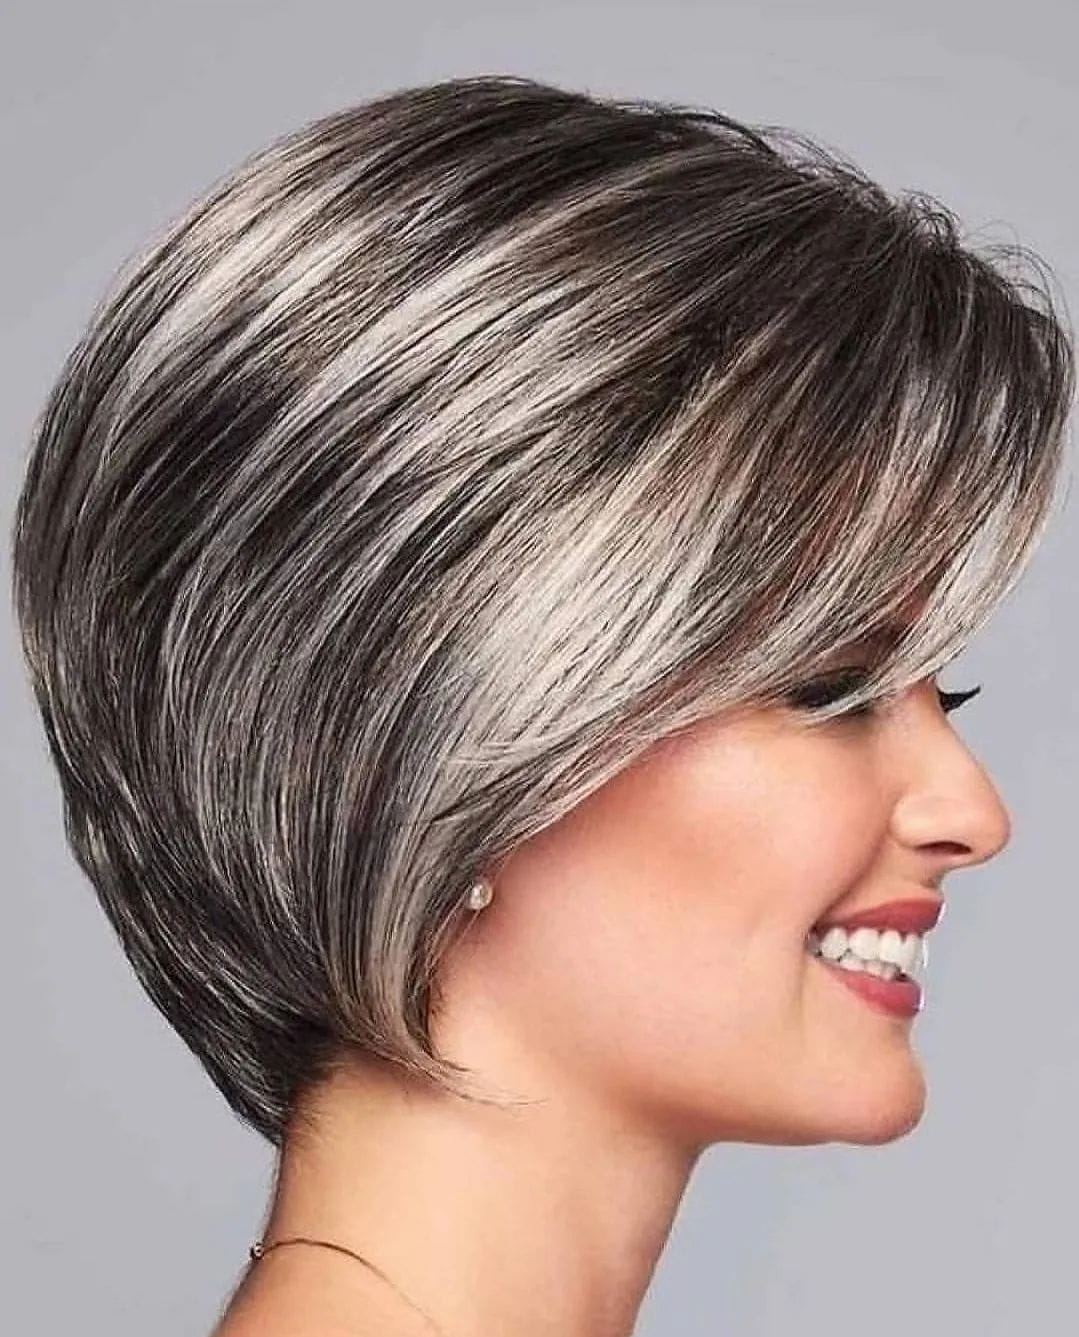 100+ Best Short Hairstyles & Haircuts For Women images 21